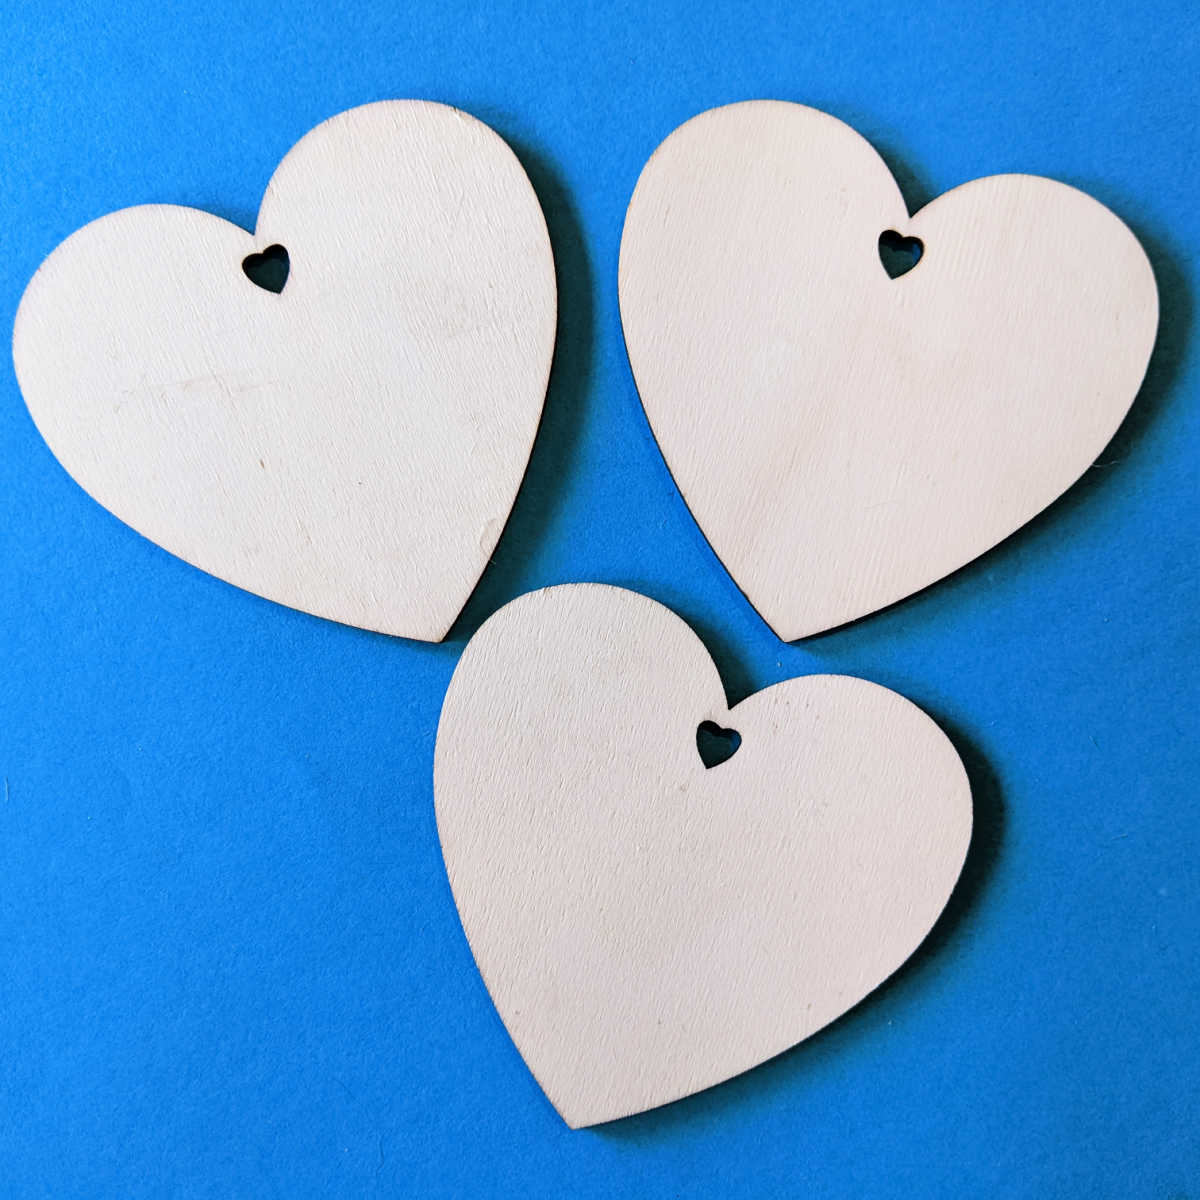 3 unfinished wood hearts